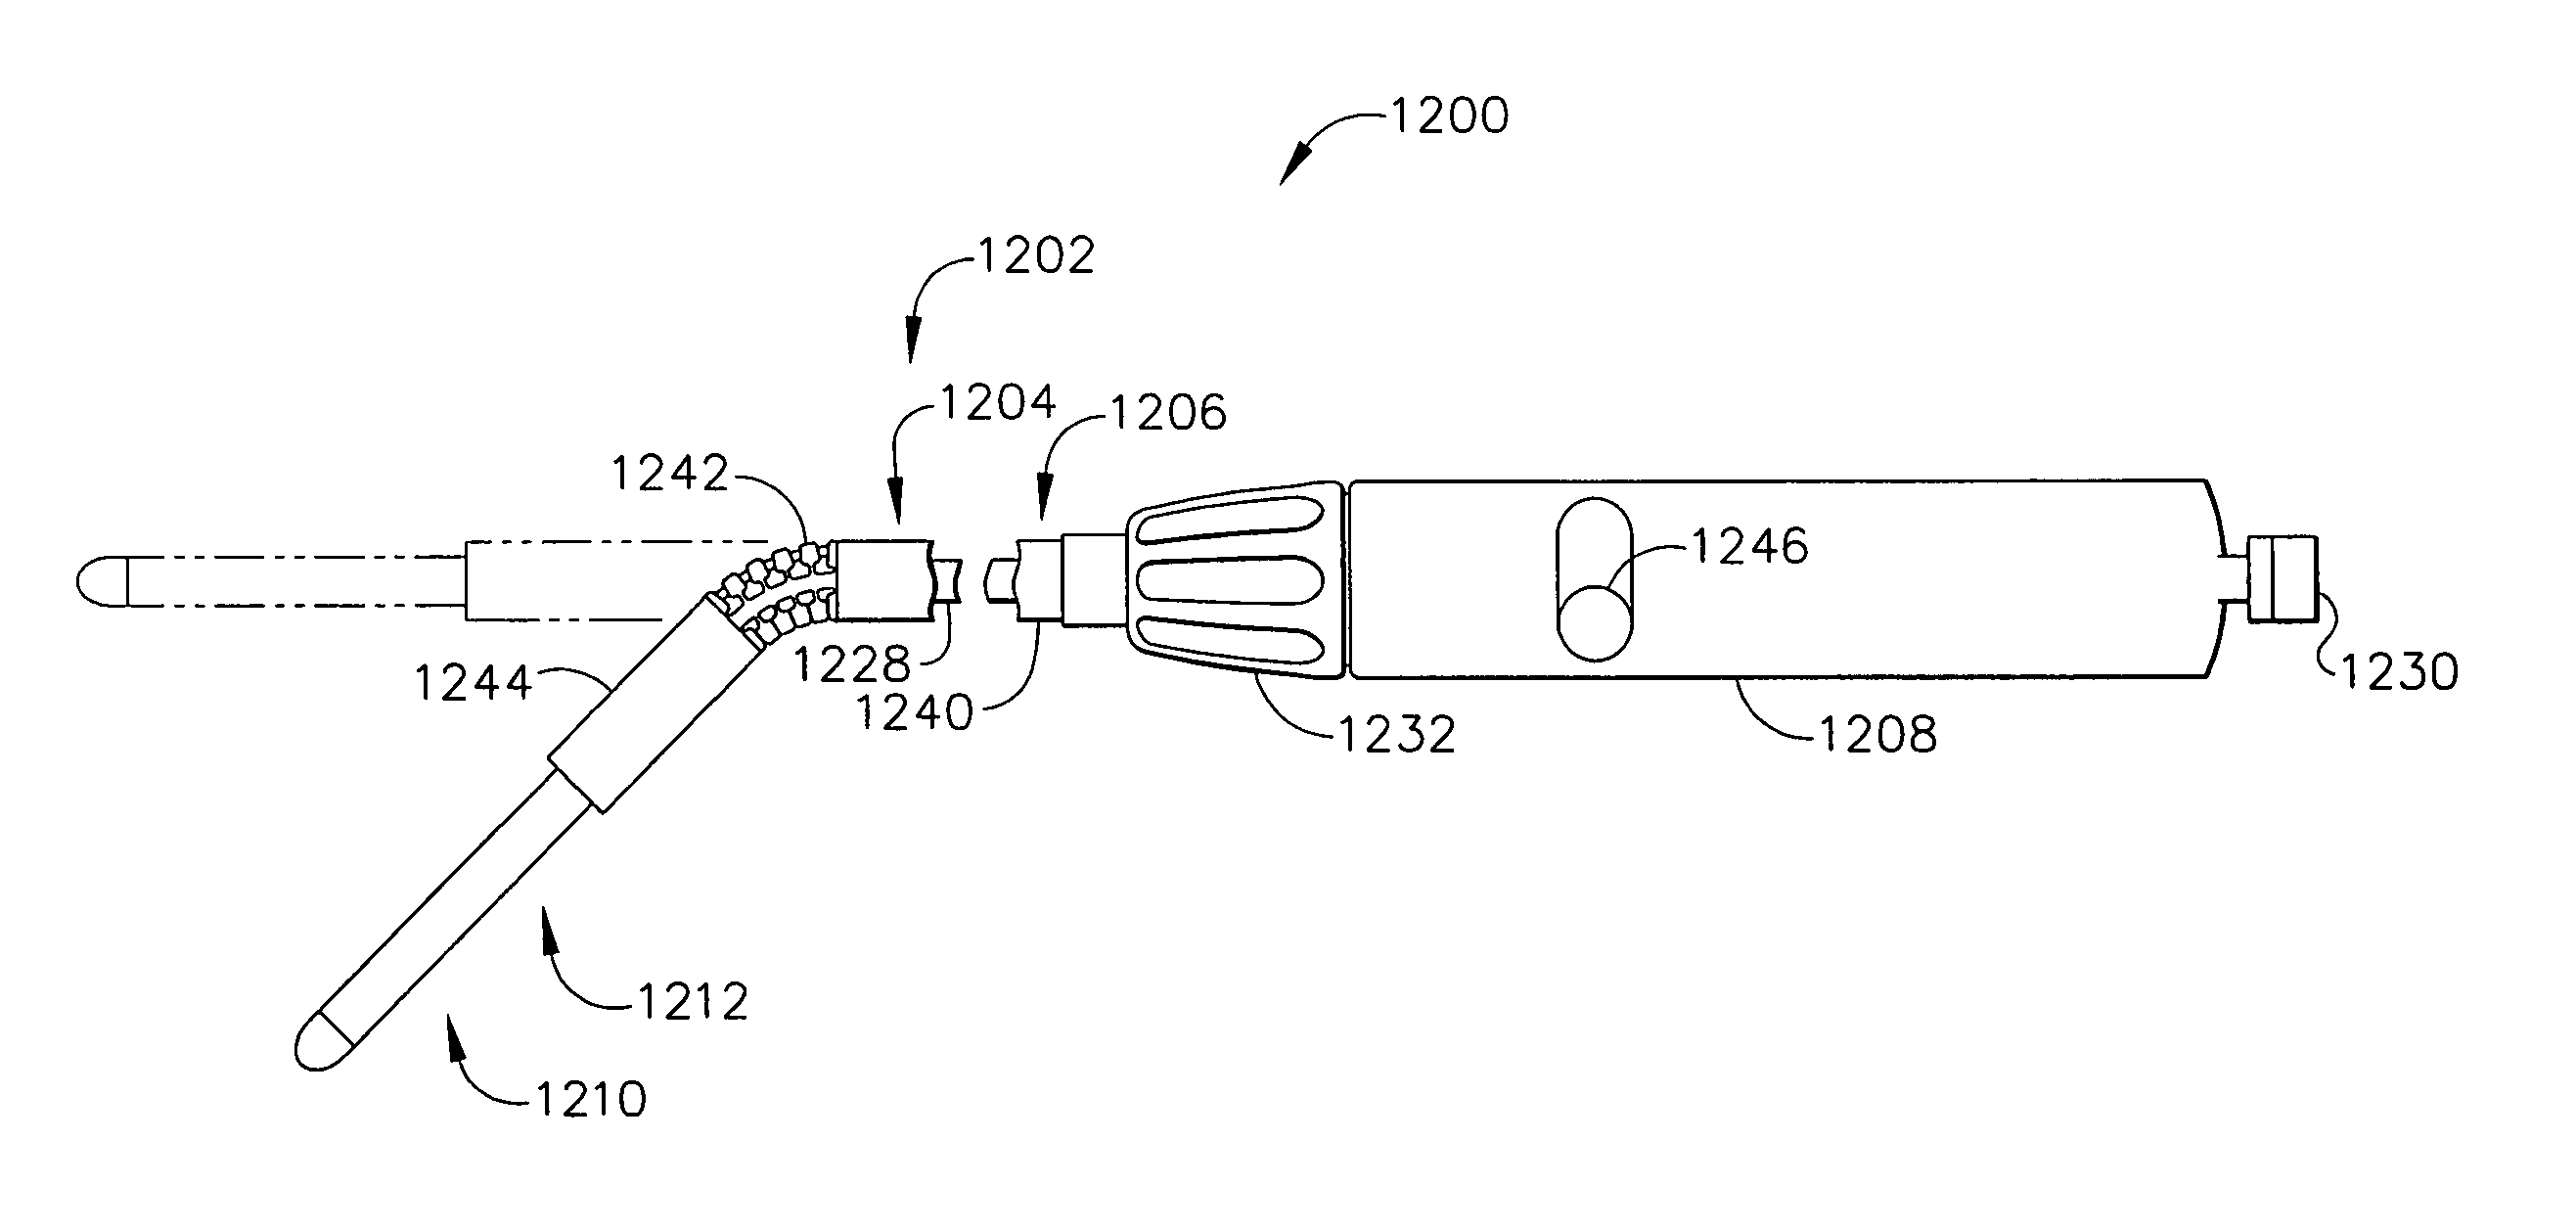 Surgical instrument incorporating an electrically actuated articulation locking mechanism